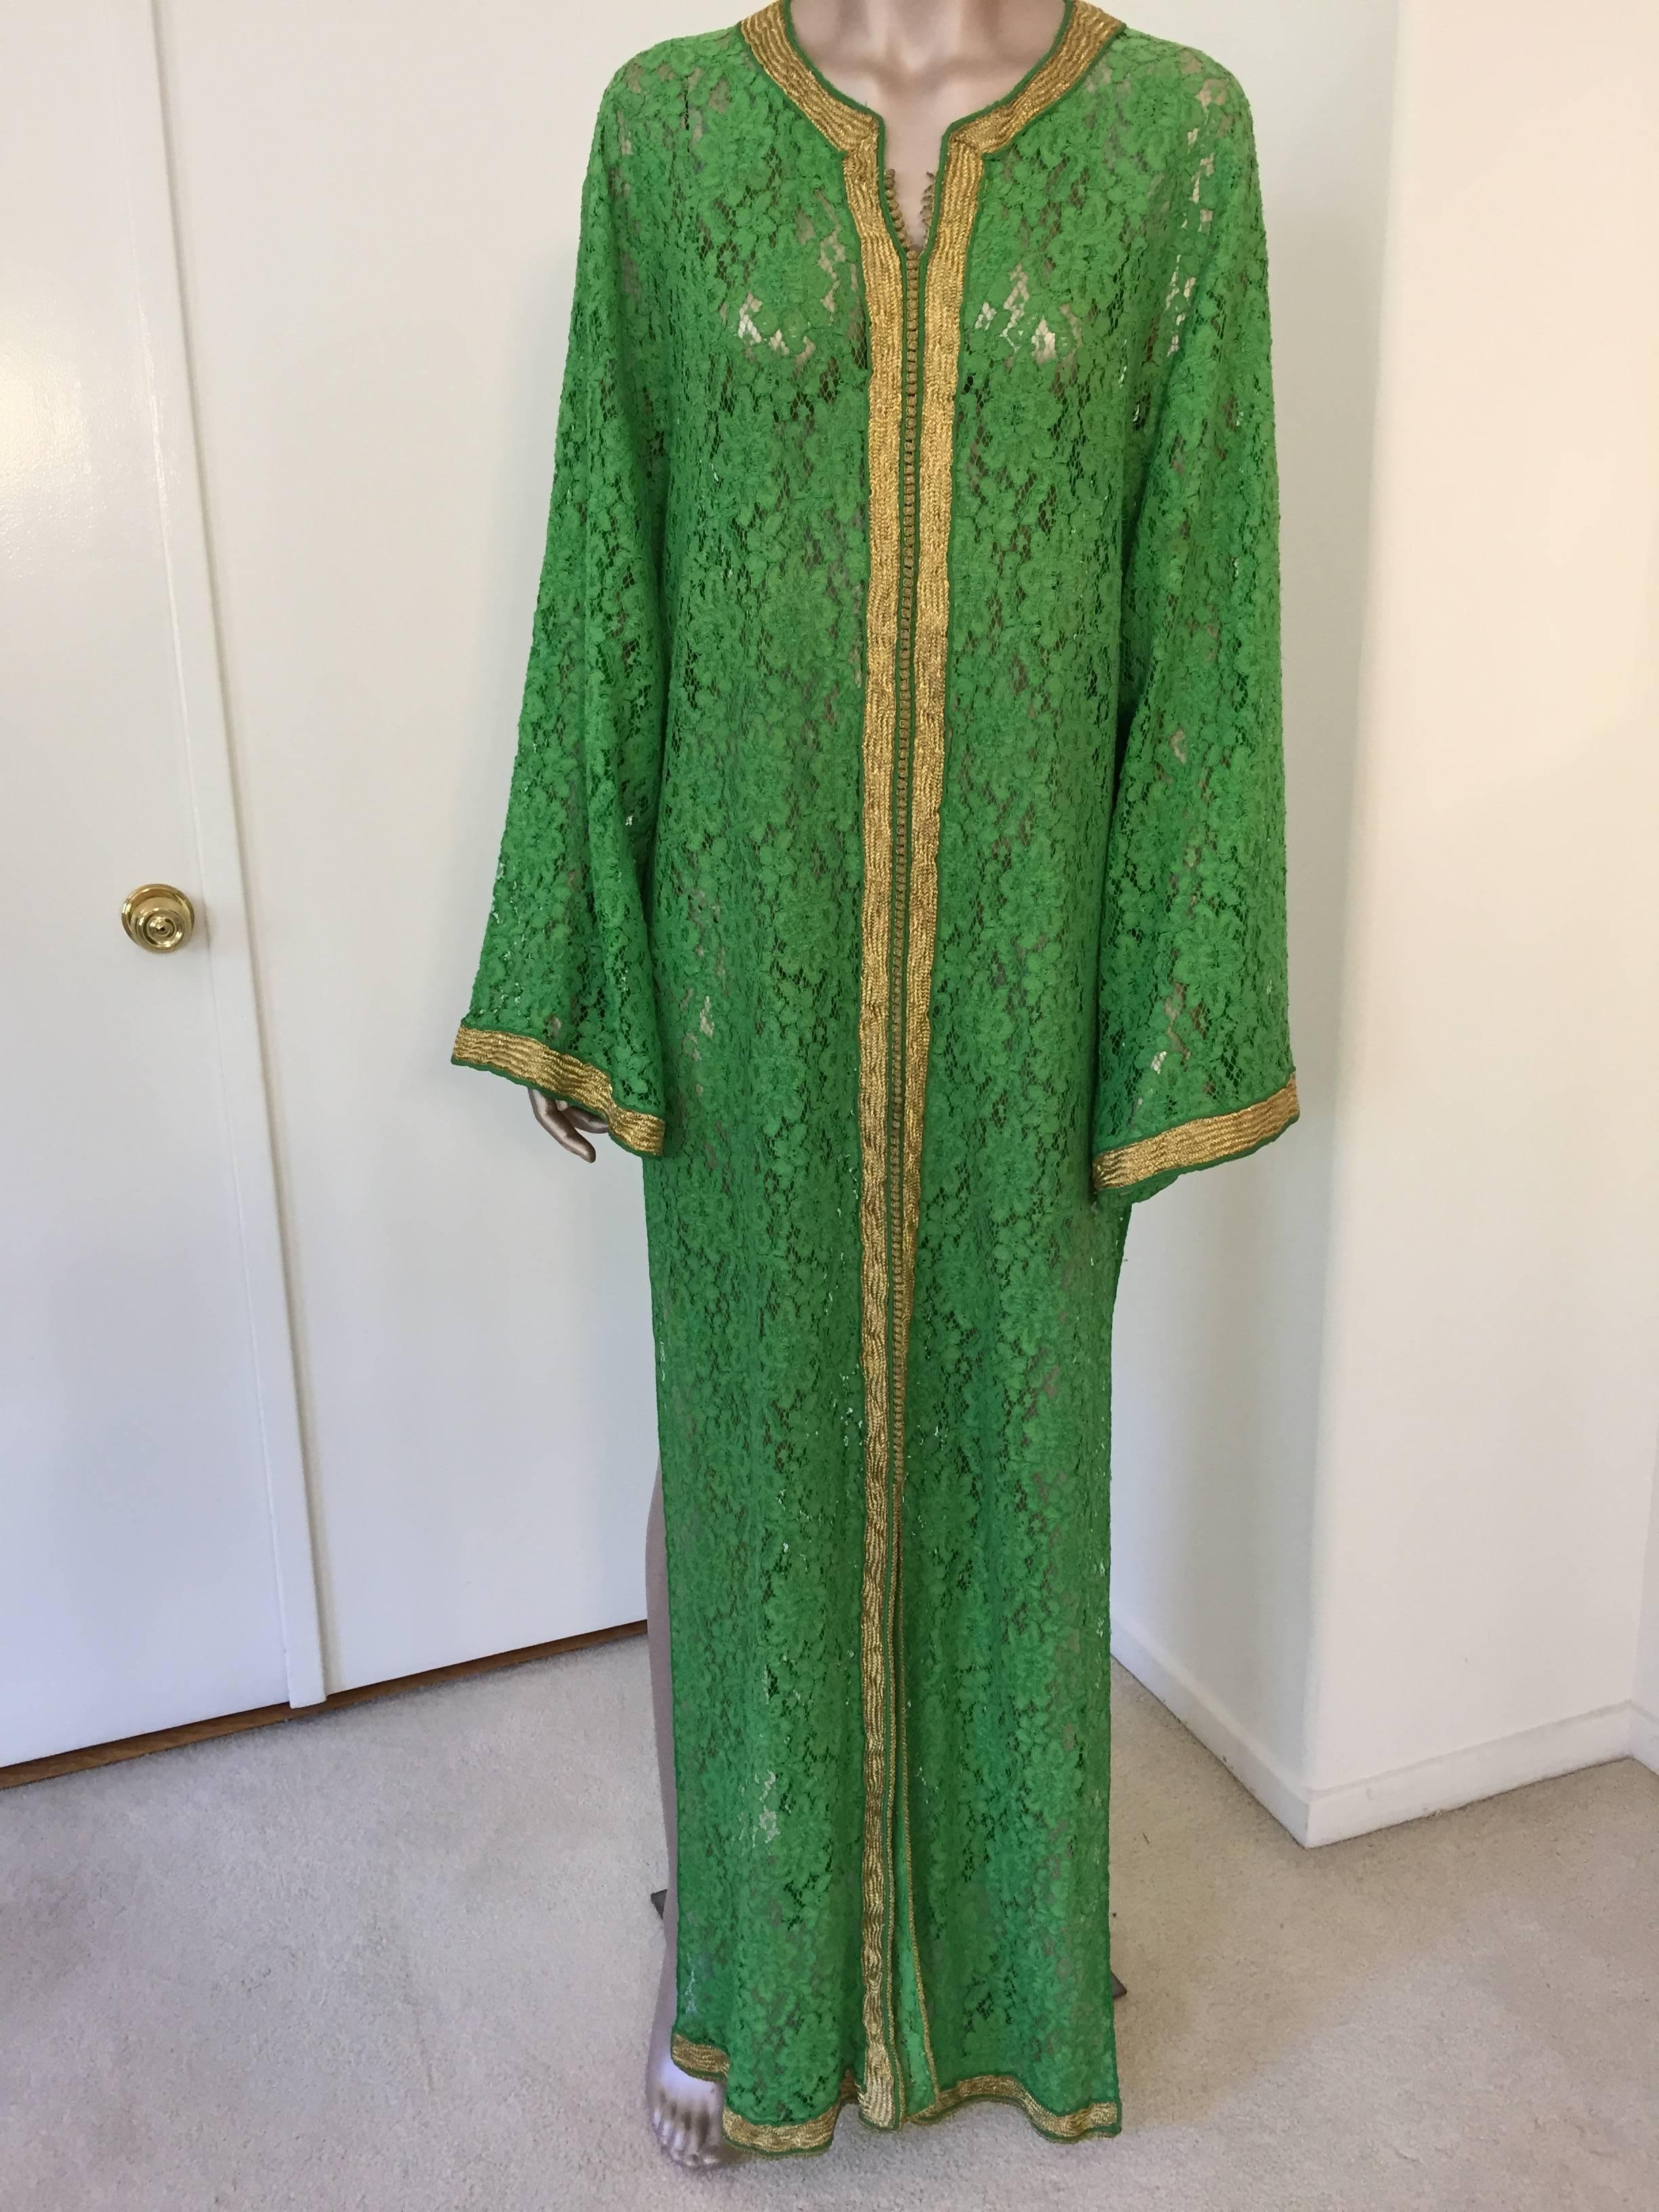 Moroccan Emerald Green Lace and Gold Trim Caftan Set 2